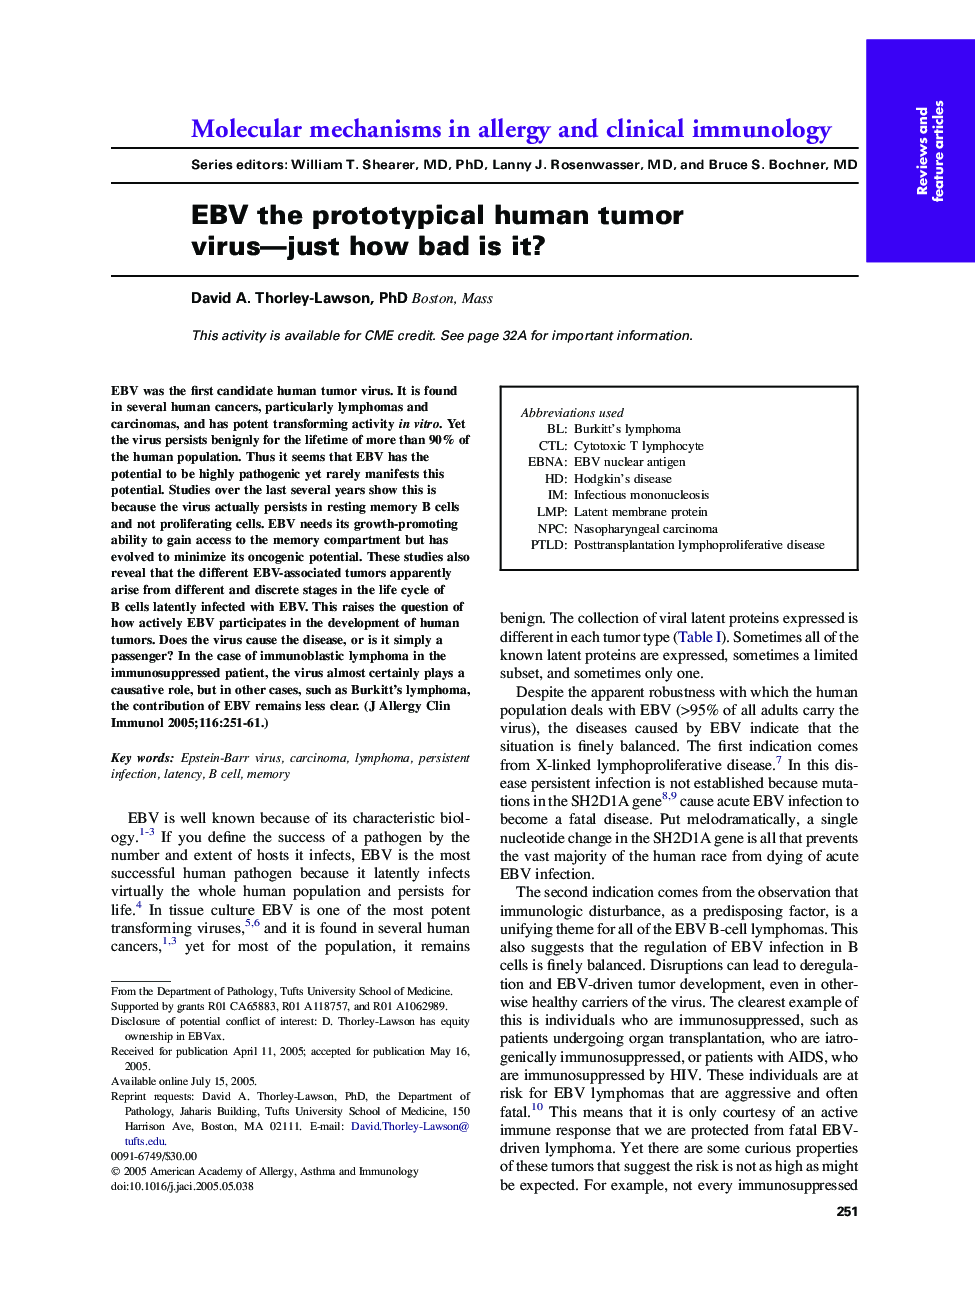 EBV the prototypical human tumor virus-just how bad is it?